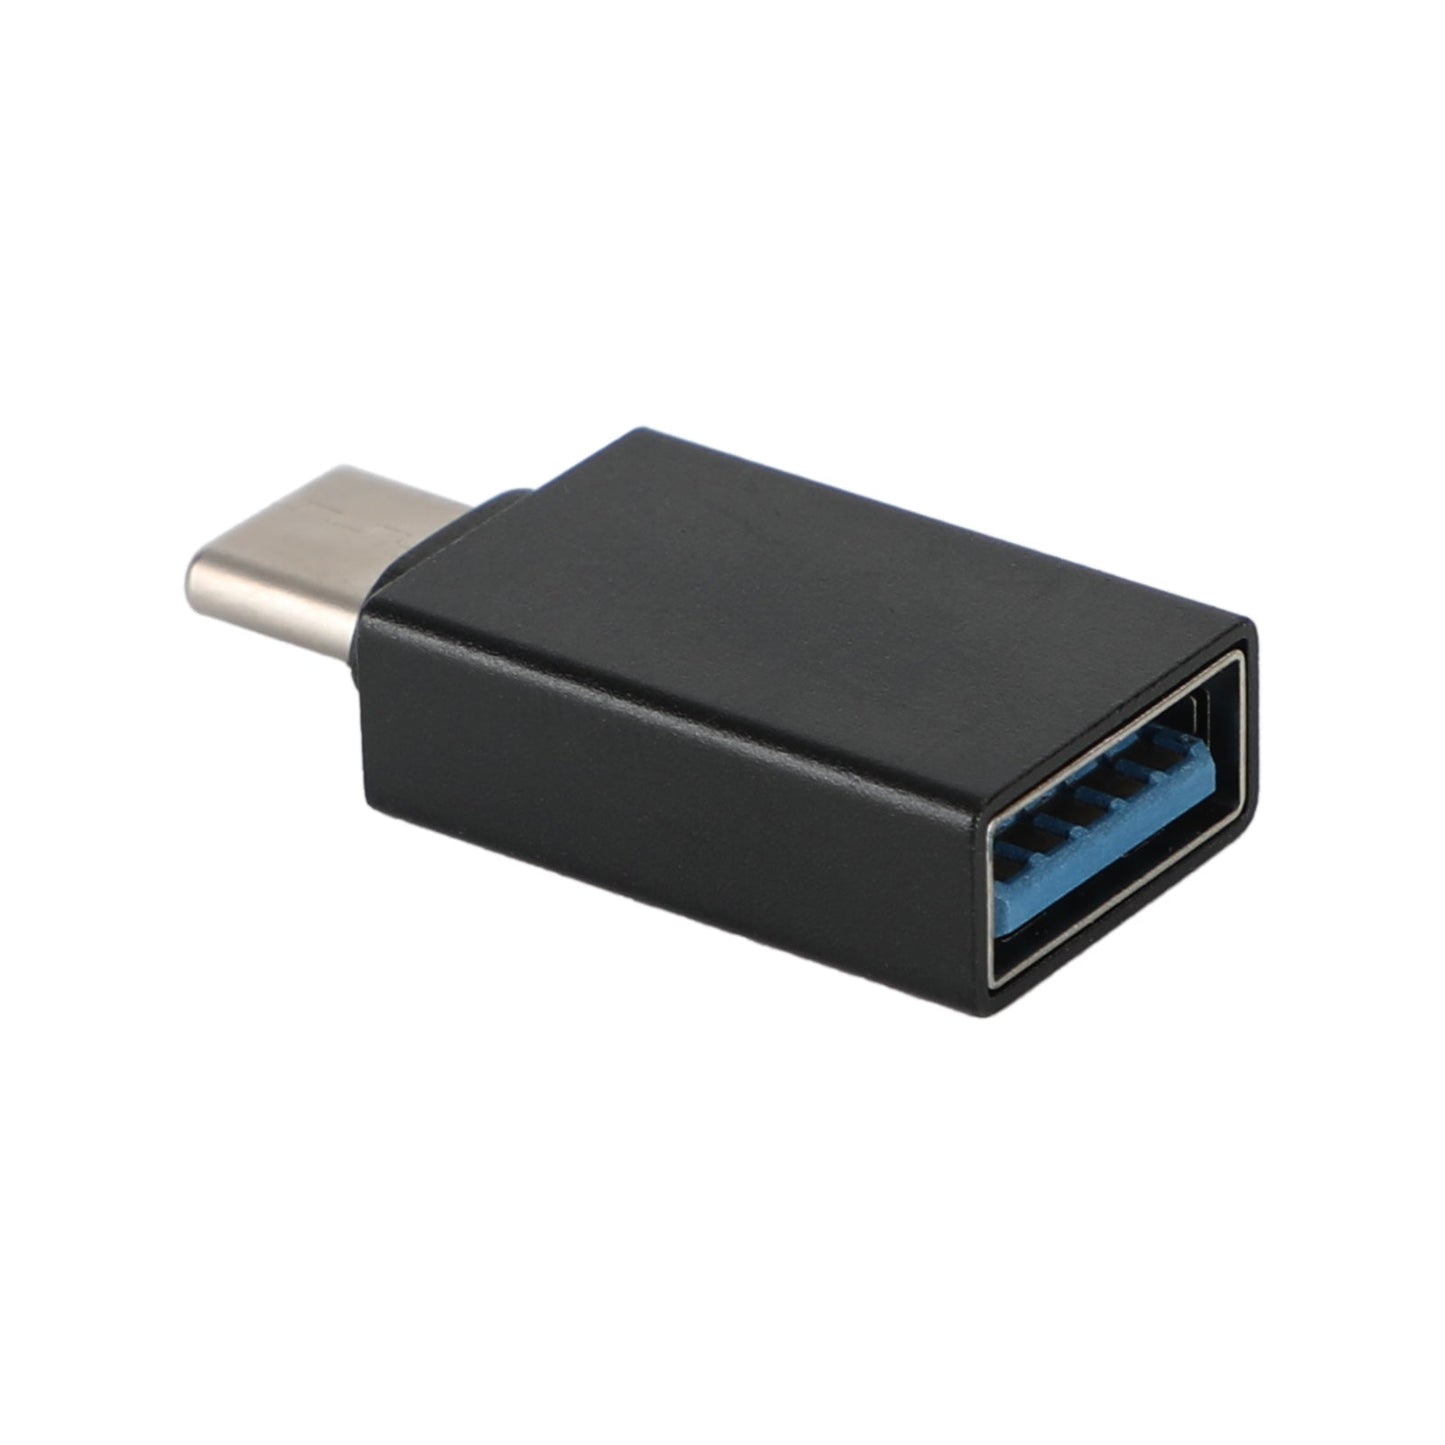 External Blu ray Drive BD Combo Player USB 3.0 and Type-C Fit for Win10 Mac OS